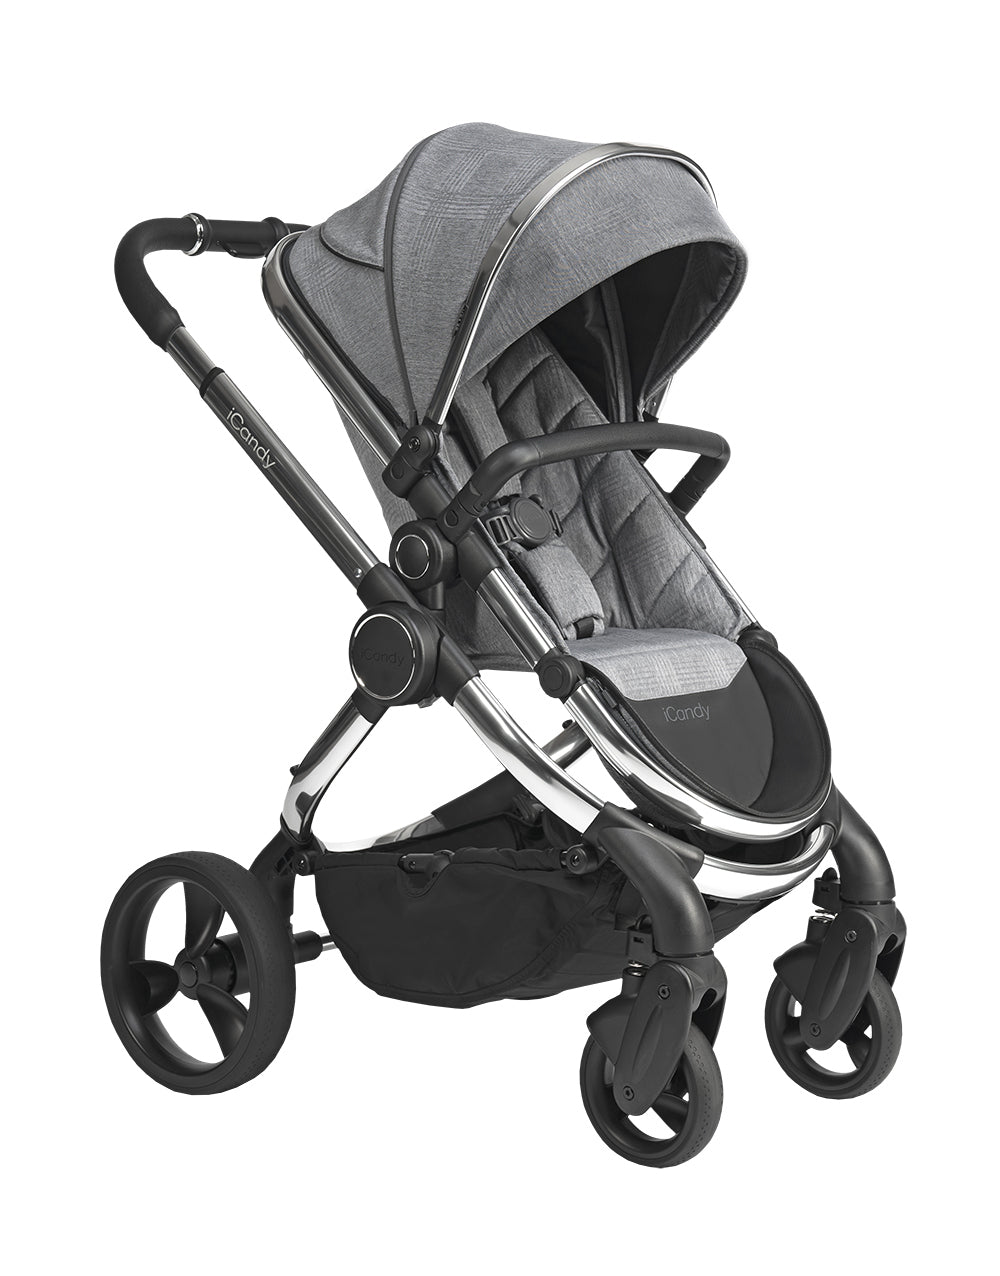 iCandy Peach Pushchair and Carrycot - Chrome Light Grey Check